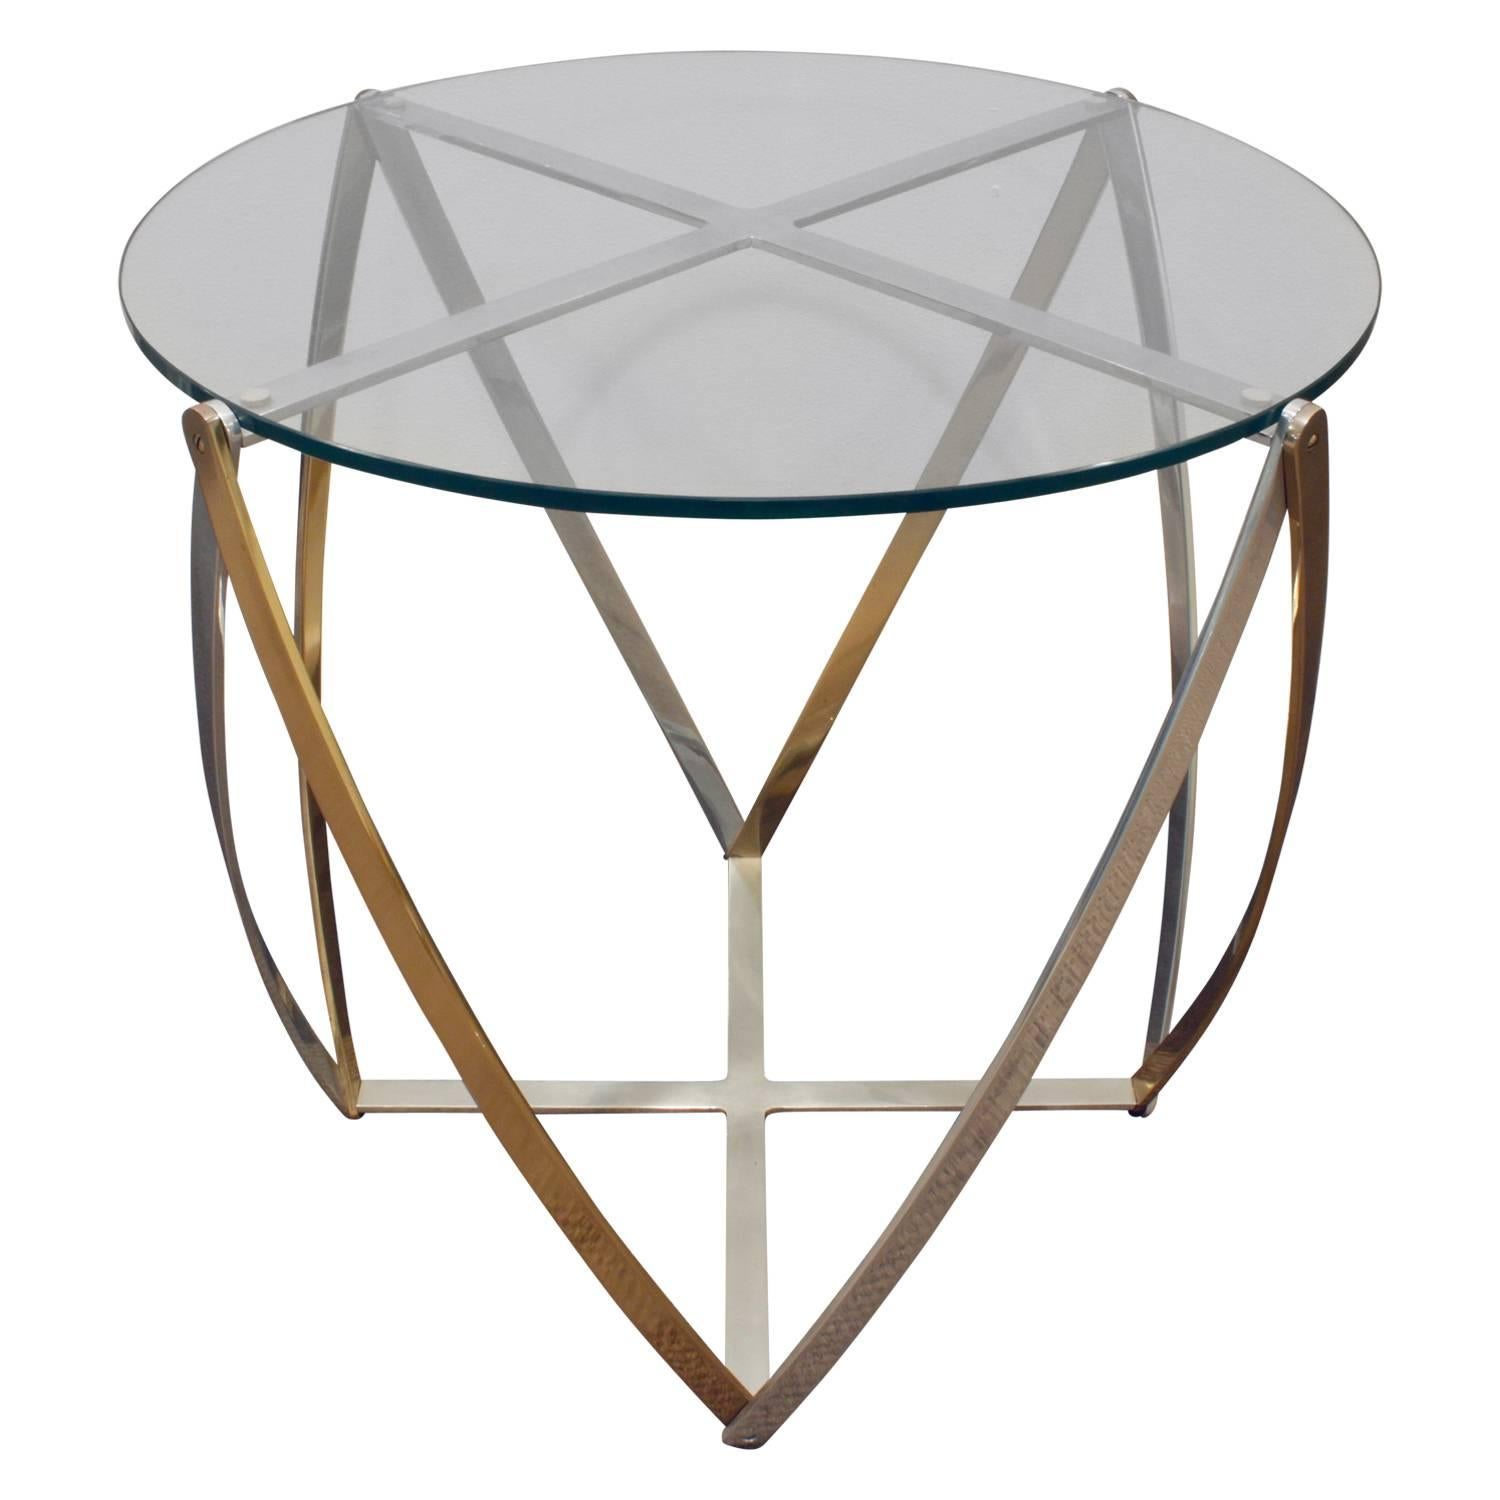 Sculptural end table in brass and brushed aluminum with inset glass top by John Vesey, American 1970's. This combination of metals is very chic.